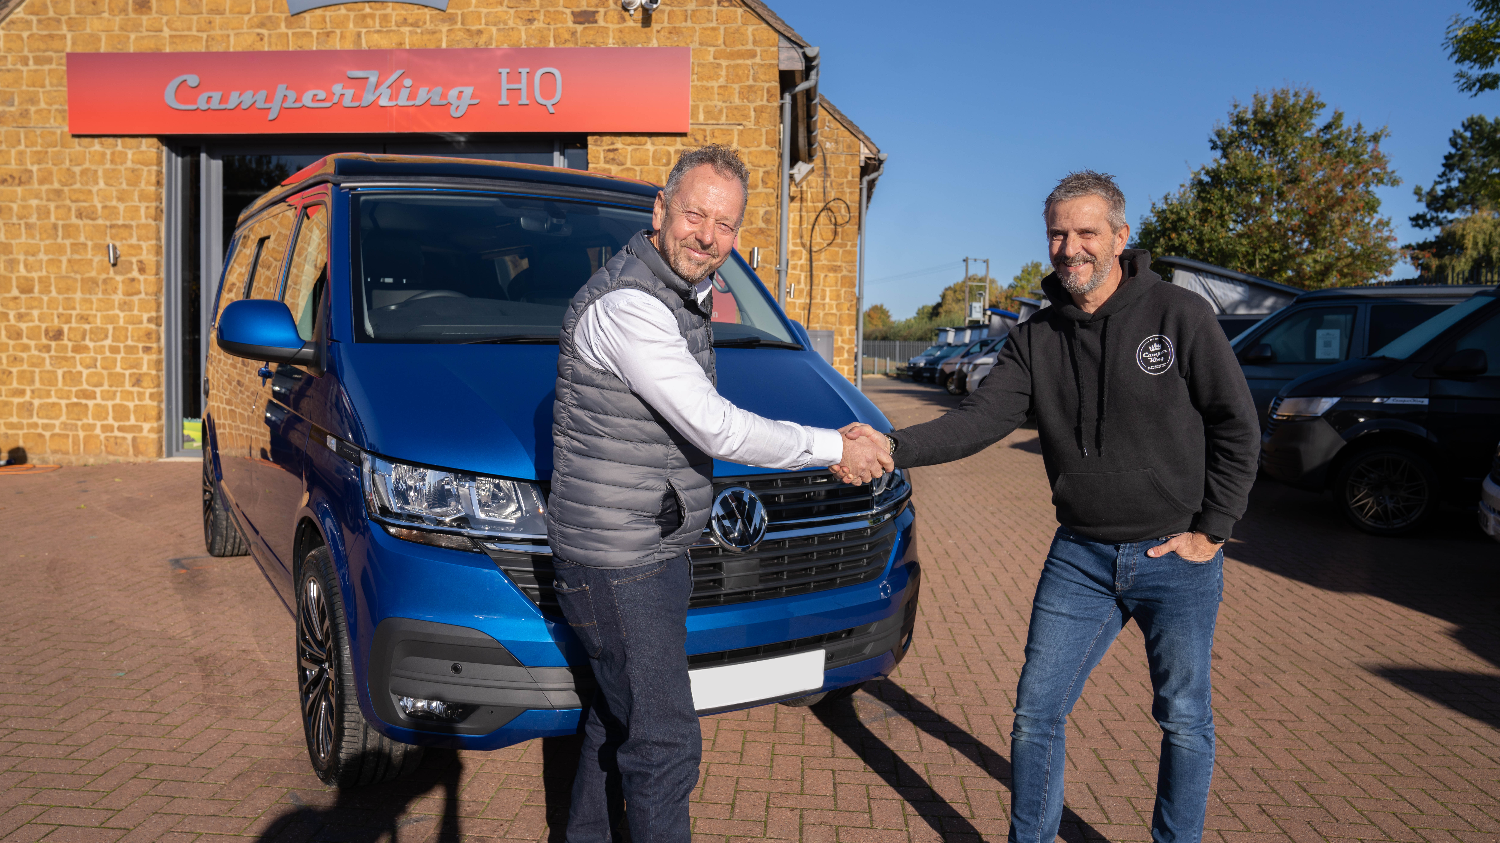 AEG MD Jason Pickerill (left) collects the company's first vehicle from CamperKing's Dealer Network Manager Steve Hayward